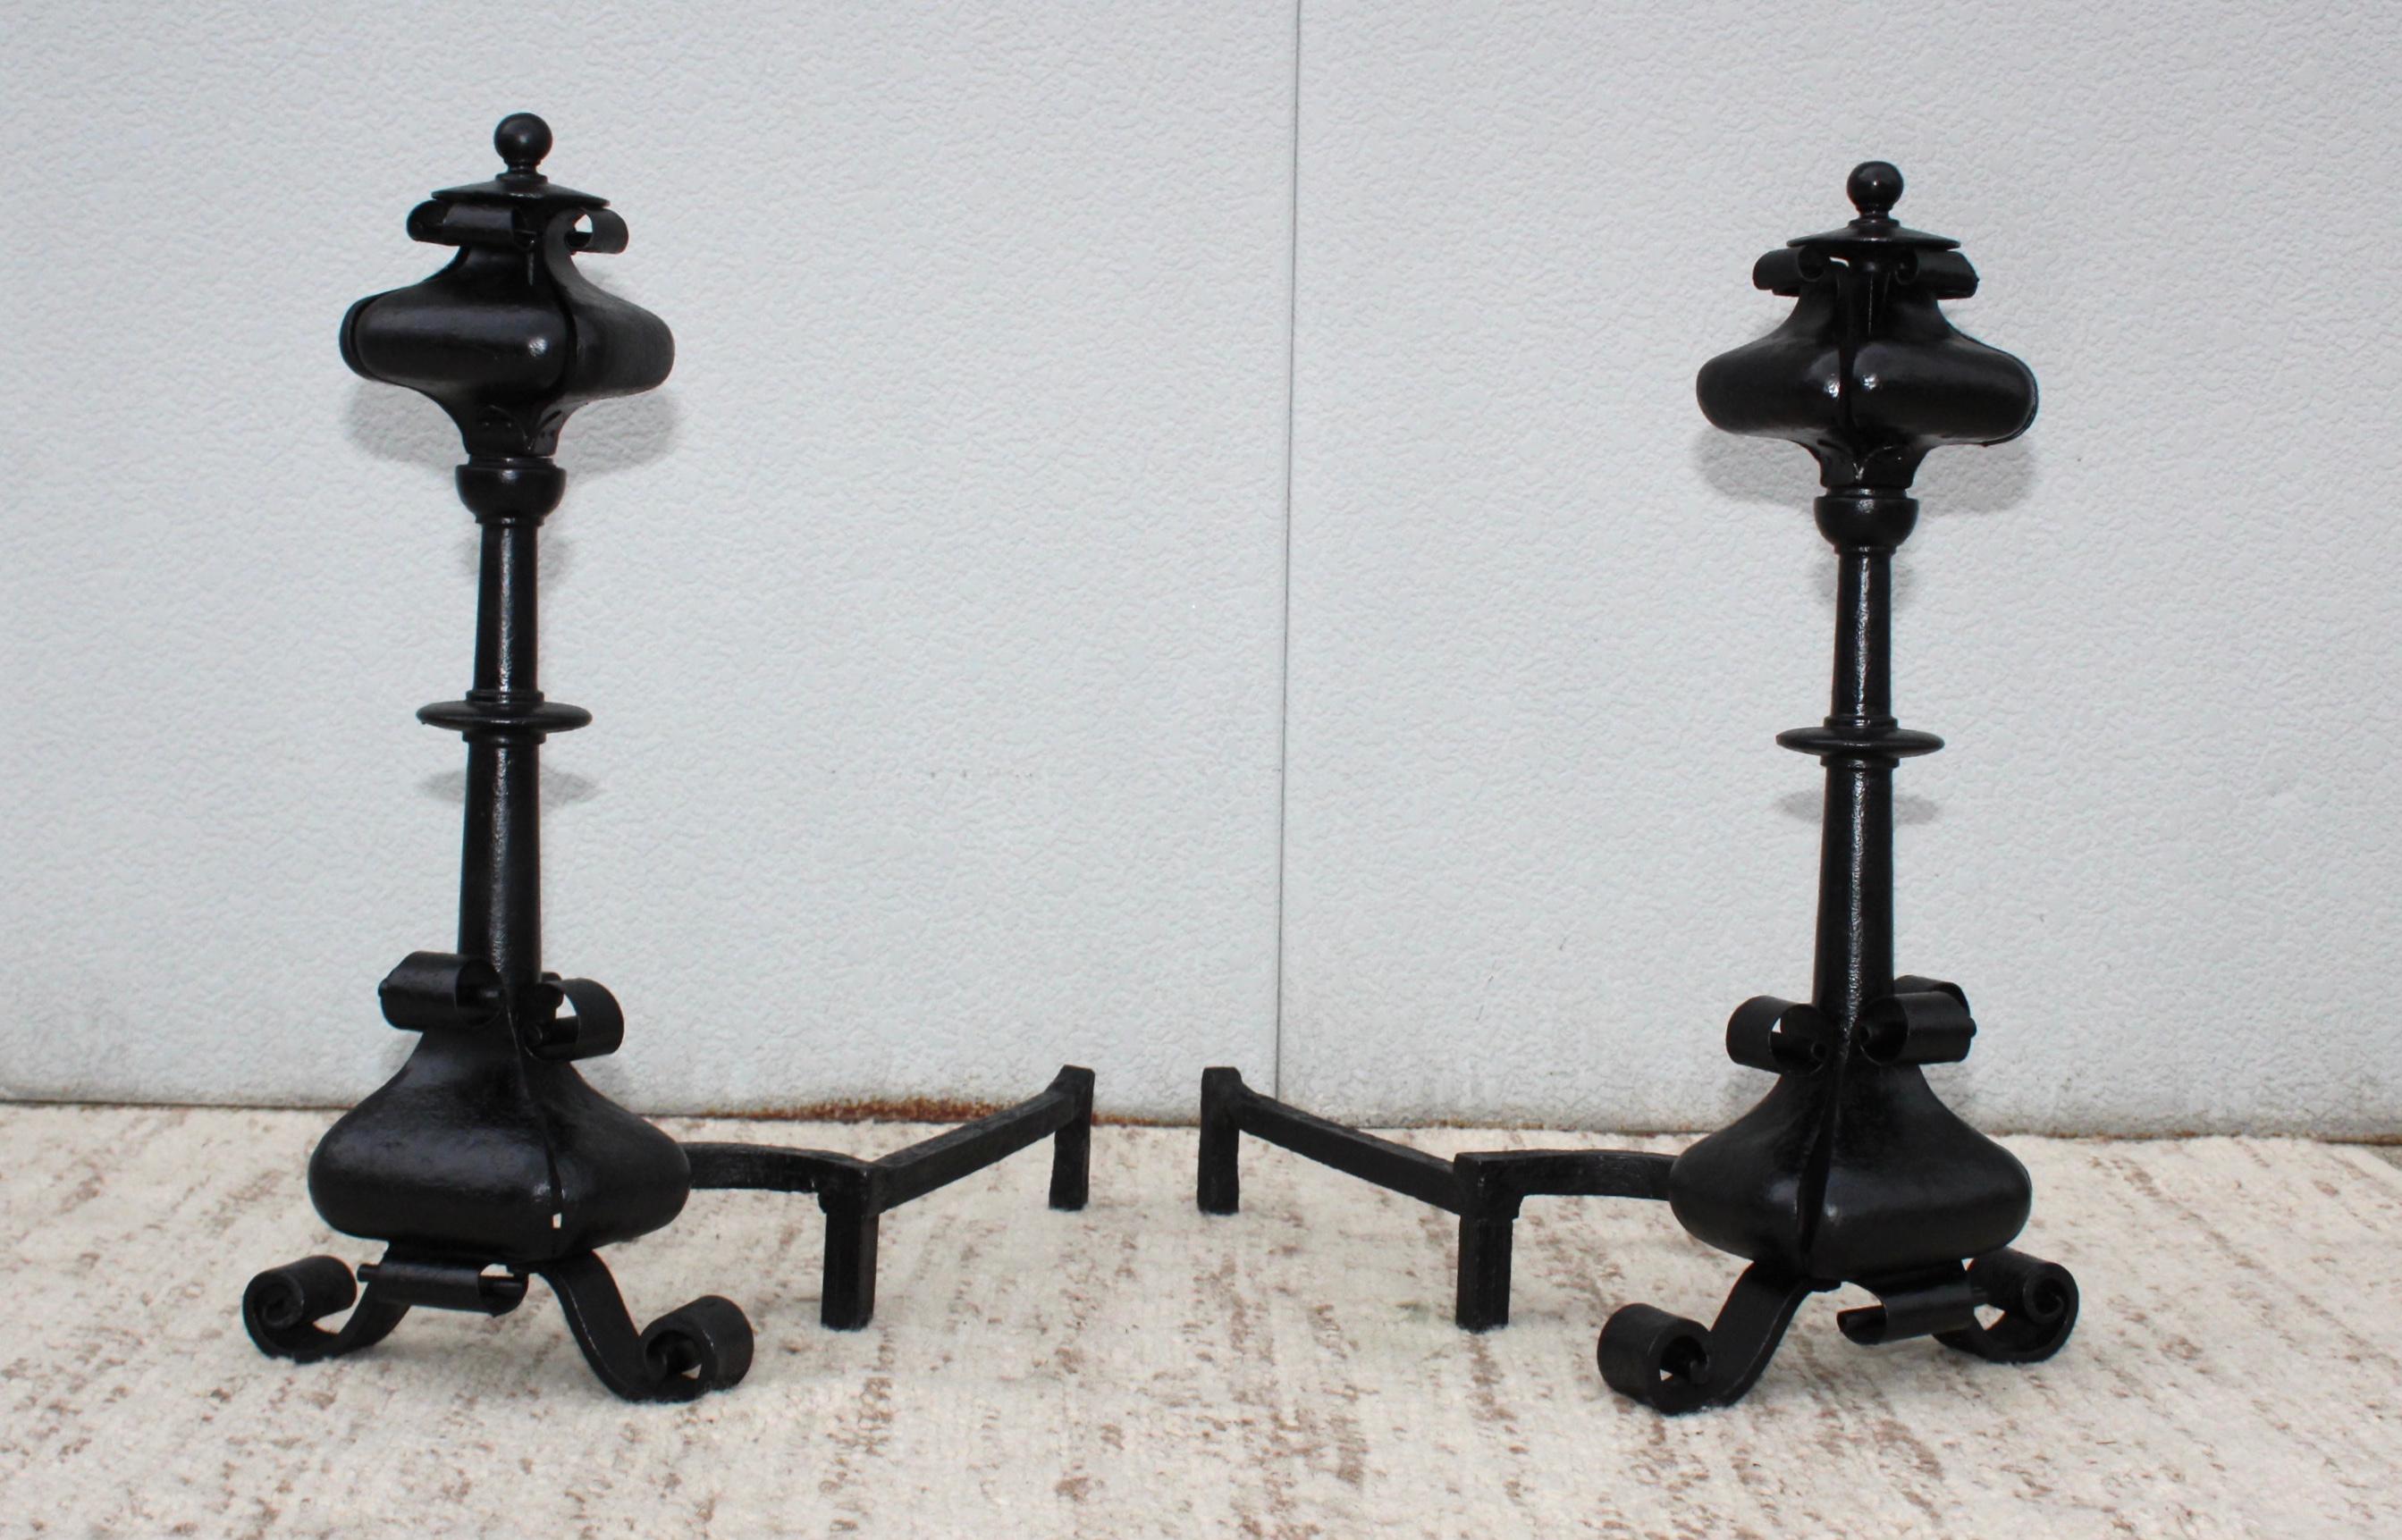 1940s large scrolled iron andirons, newly painted with some wear and patina due to age and use.